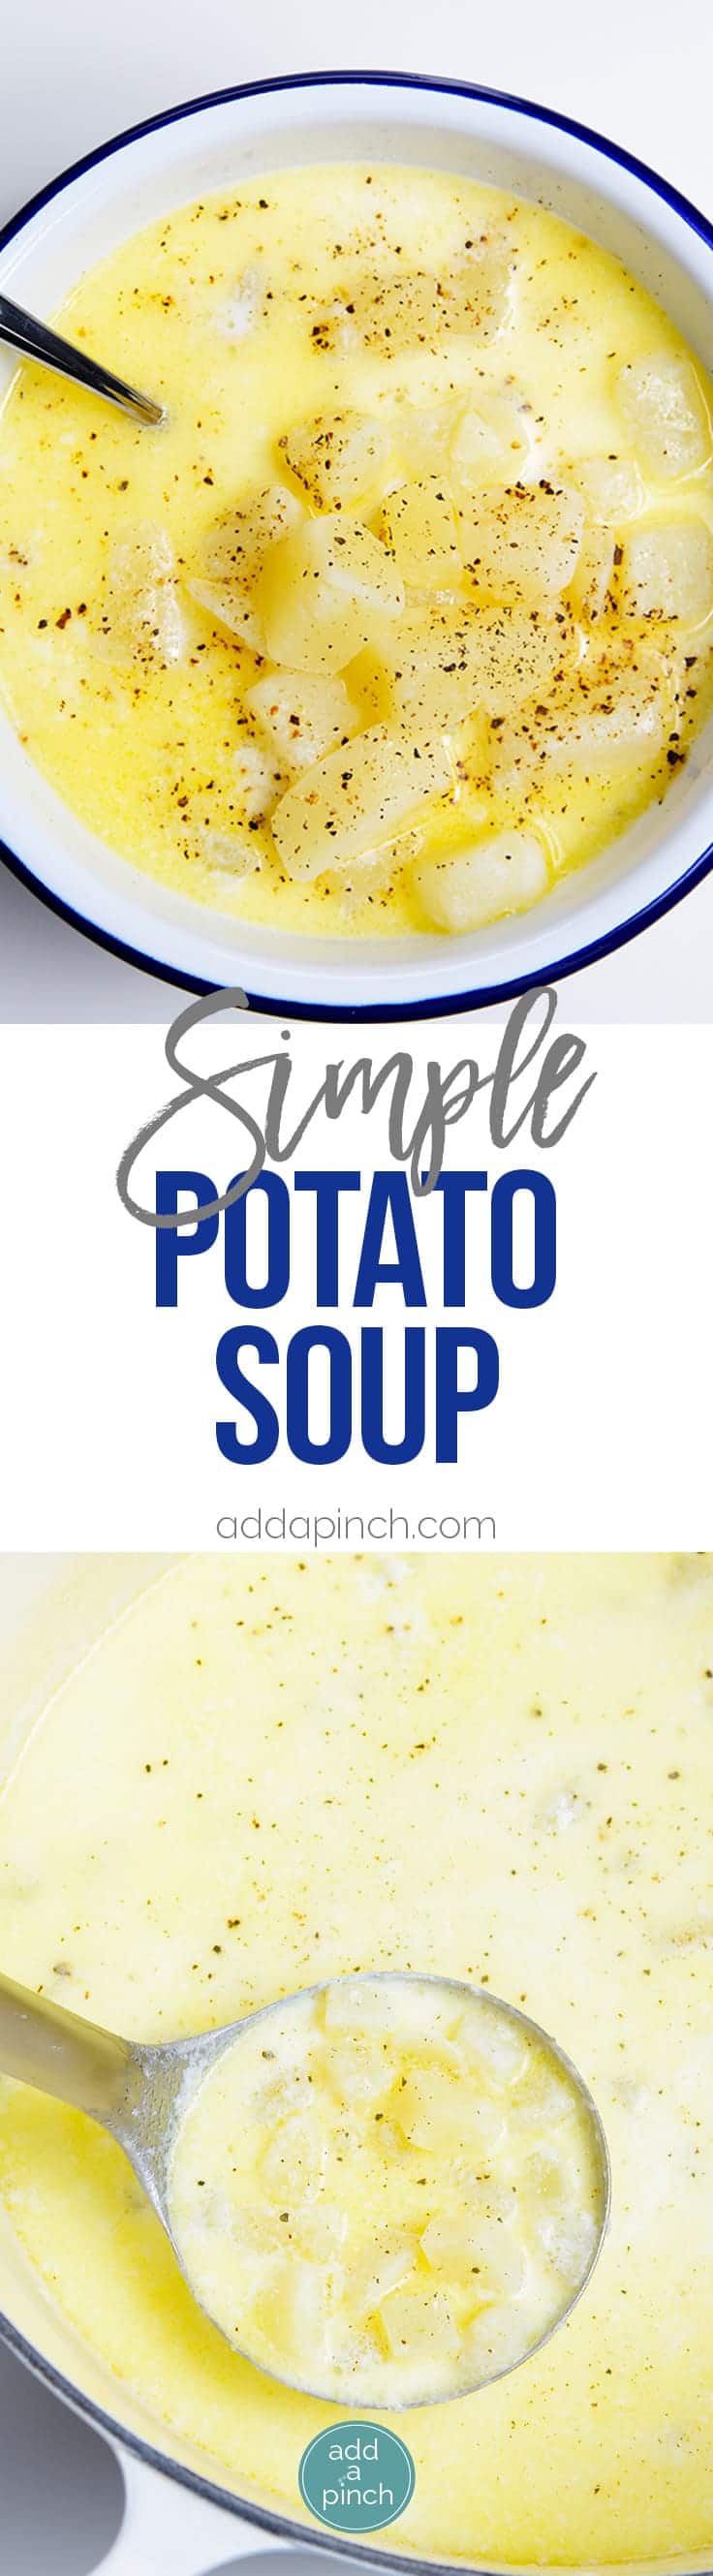 Potato Soup Recipe - My Grandmother Verdie's Potato Soup recipe makes an old-fashioned, easy, comforting soup recipe.  // addapinch.com